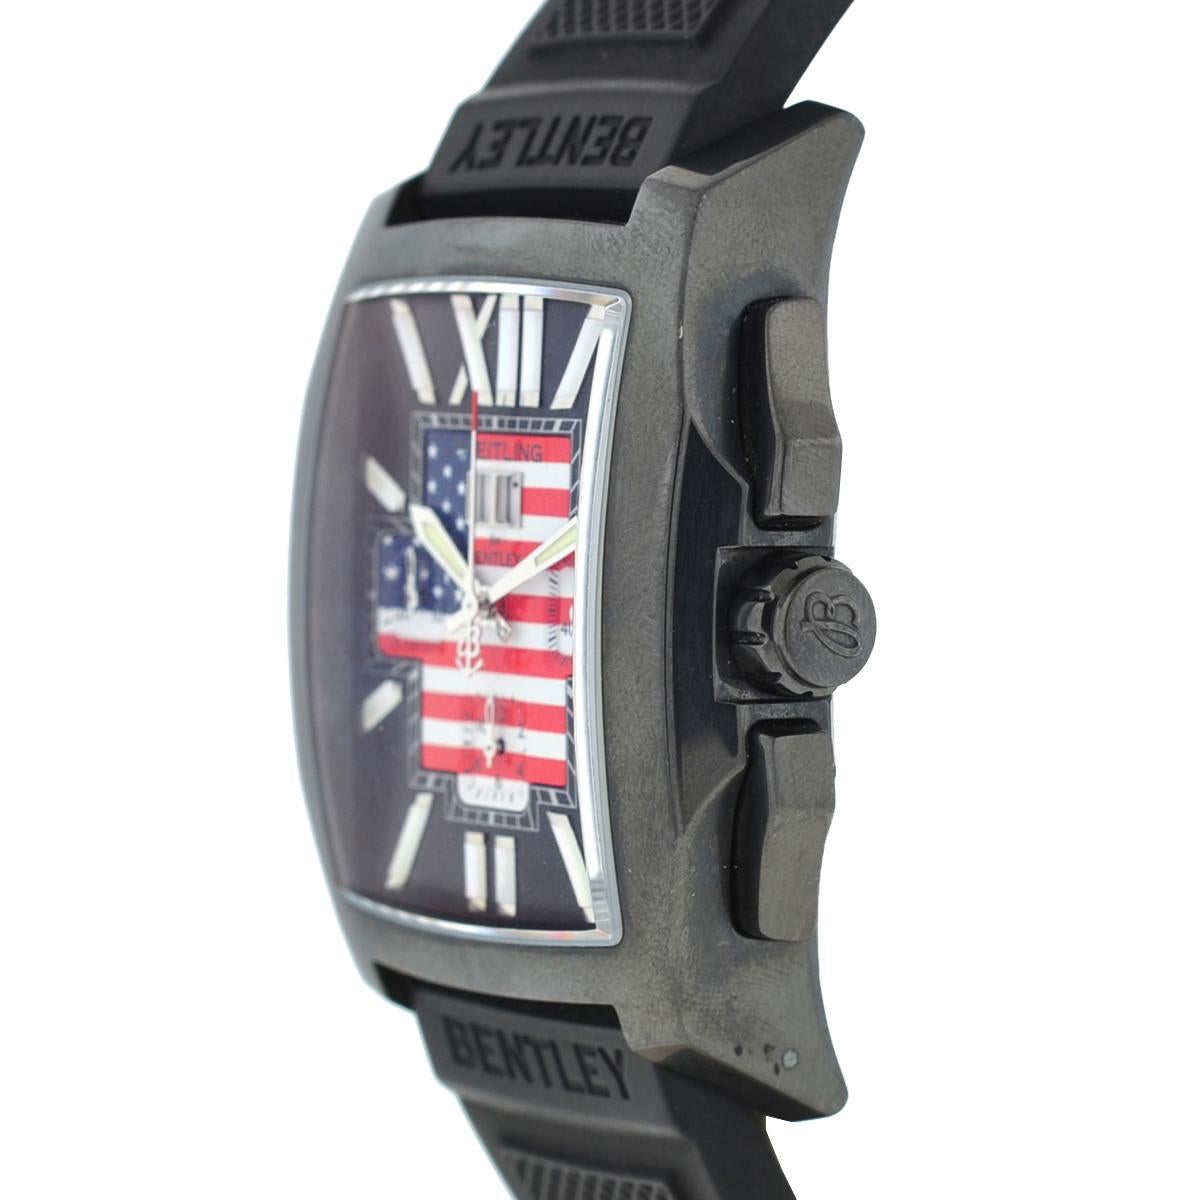 Company-Breitling for Bentley
Style-Luxury Watch
Model-United we Stand
Reference Number-M44365
Case Metal-PVD Stainless Steel
Case Measurement-40 mm x 45 mm
Bracelet-Rubber 
Dial-American Flag 
Bezel-PVD Stainless Steel 
Crystal-Scratch Resistant